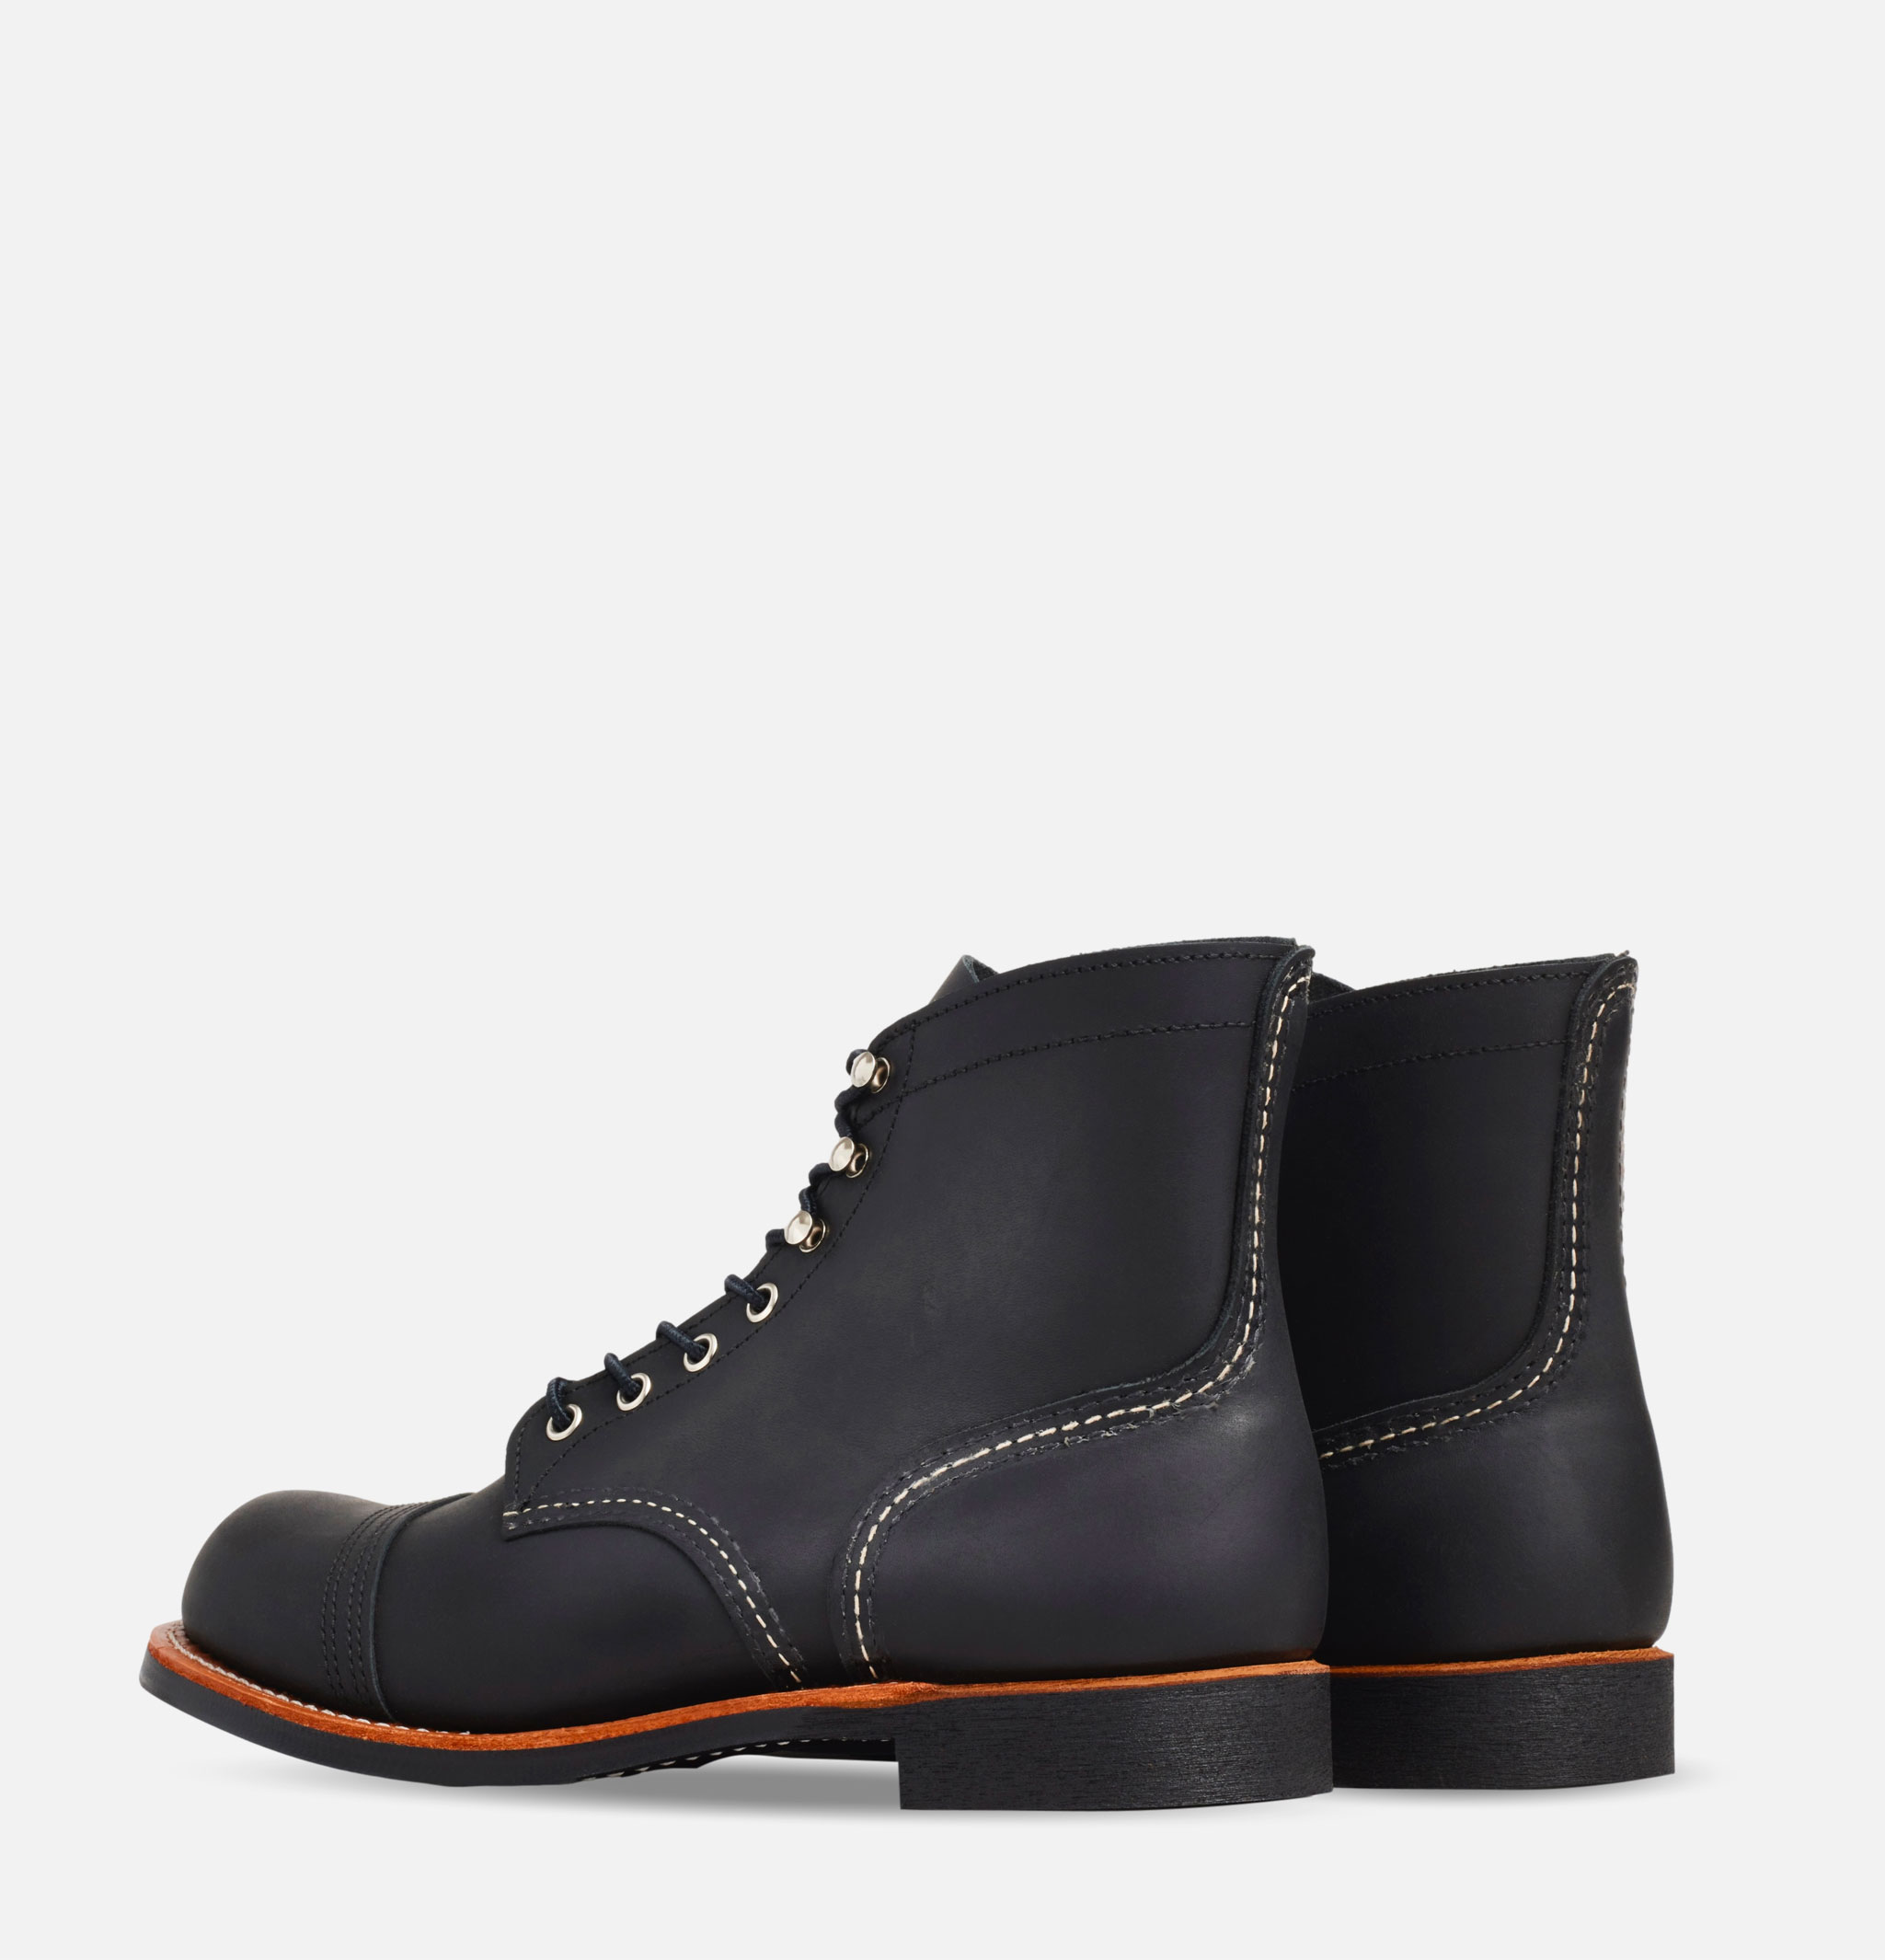 Red Wing Shoes - 8084 - Iron Ranger Black Harness